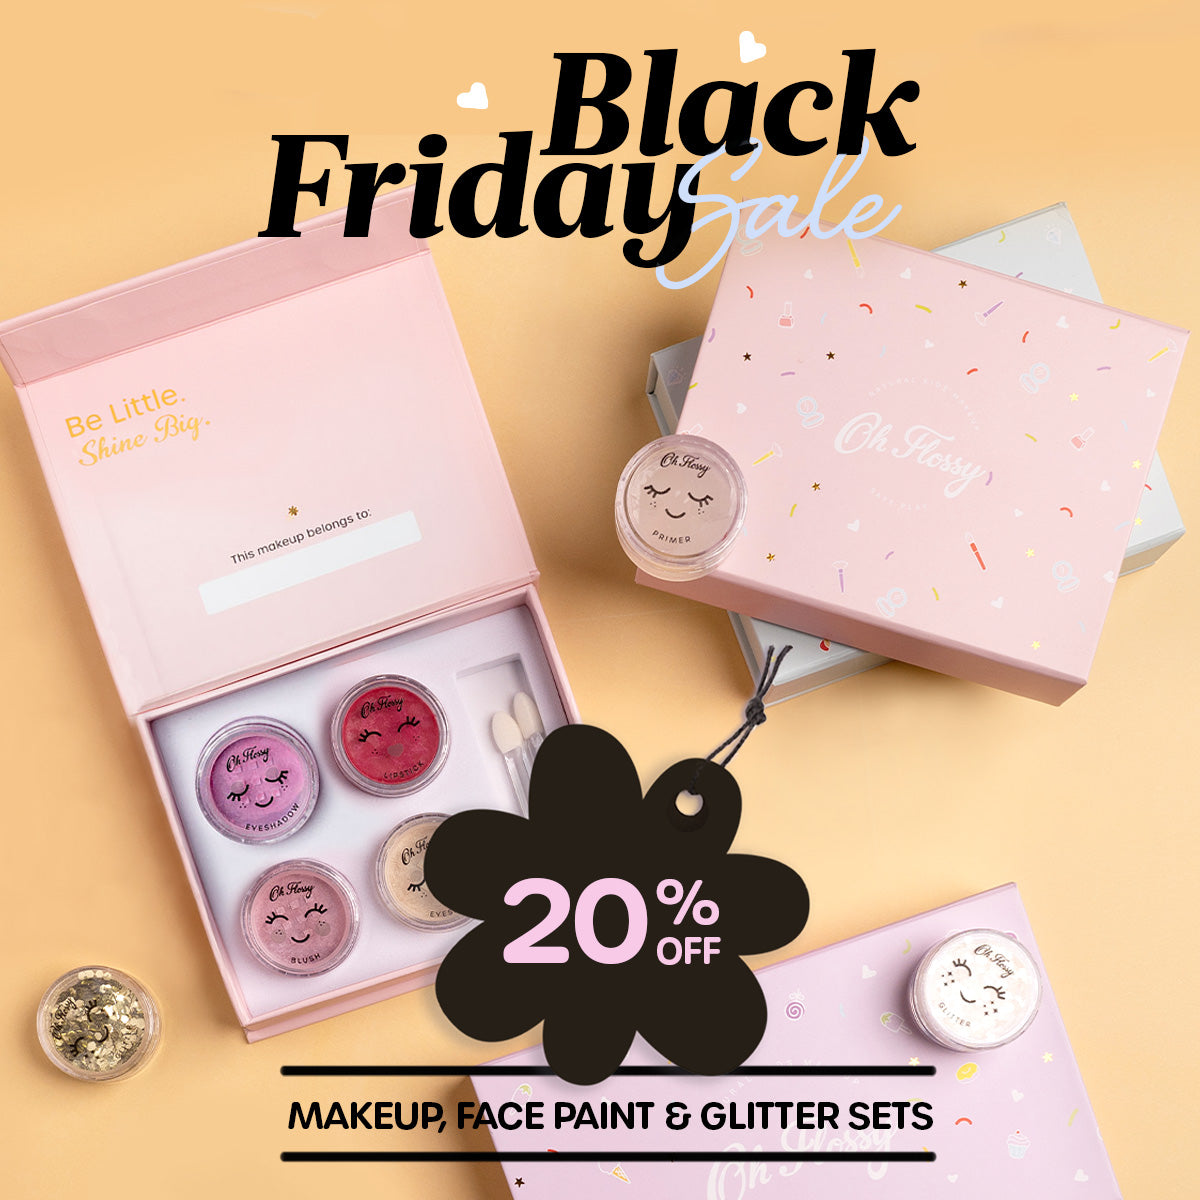 Oh Flossy's Black Friday Sale is now live! 20% off makeup sets!